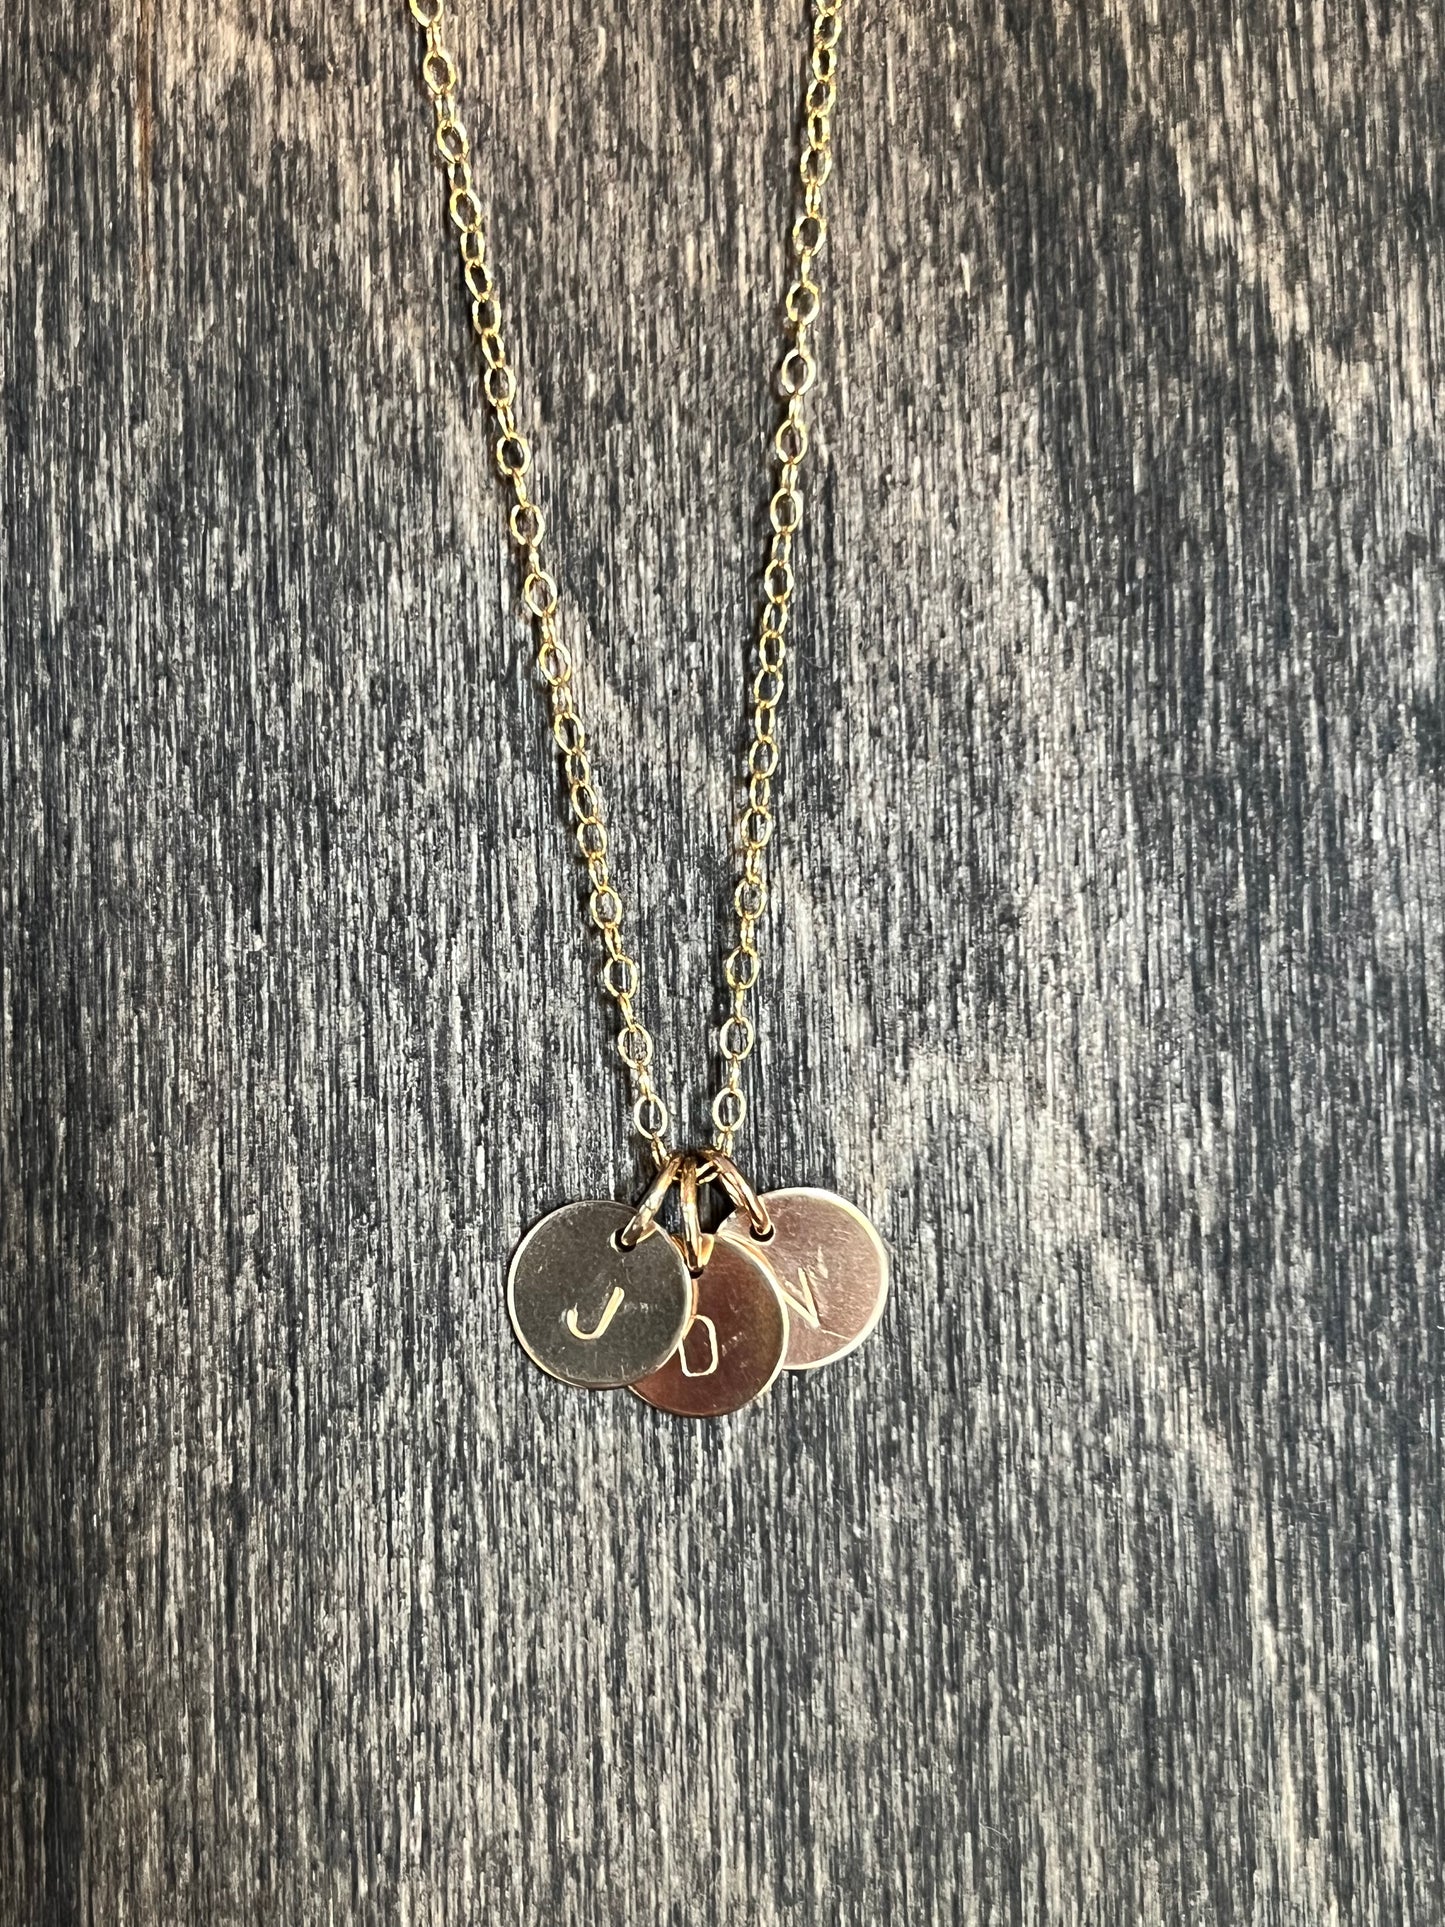 Initial Disc Necklace - 14k Gold Fill